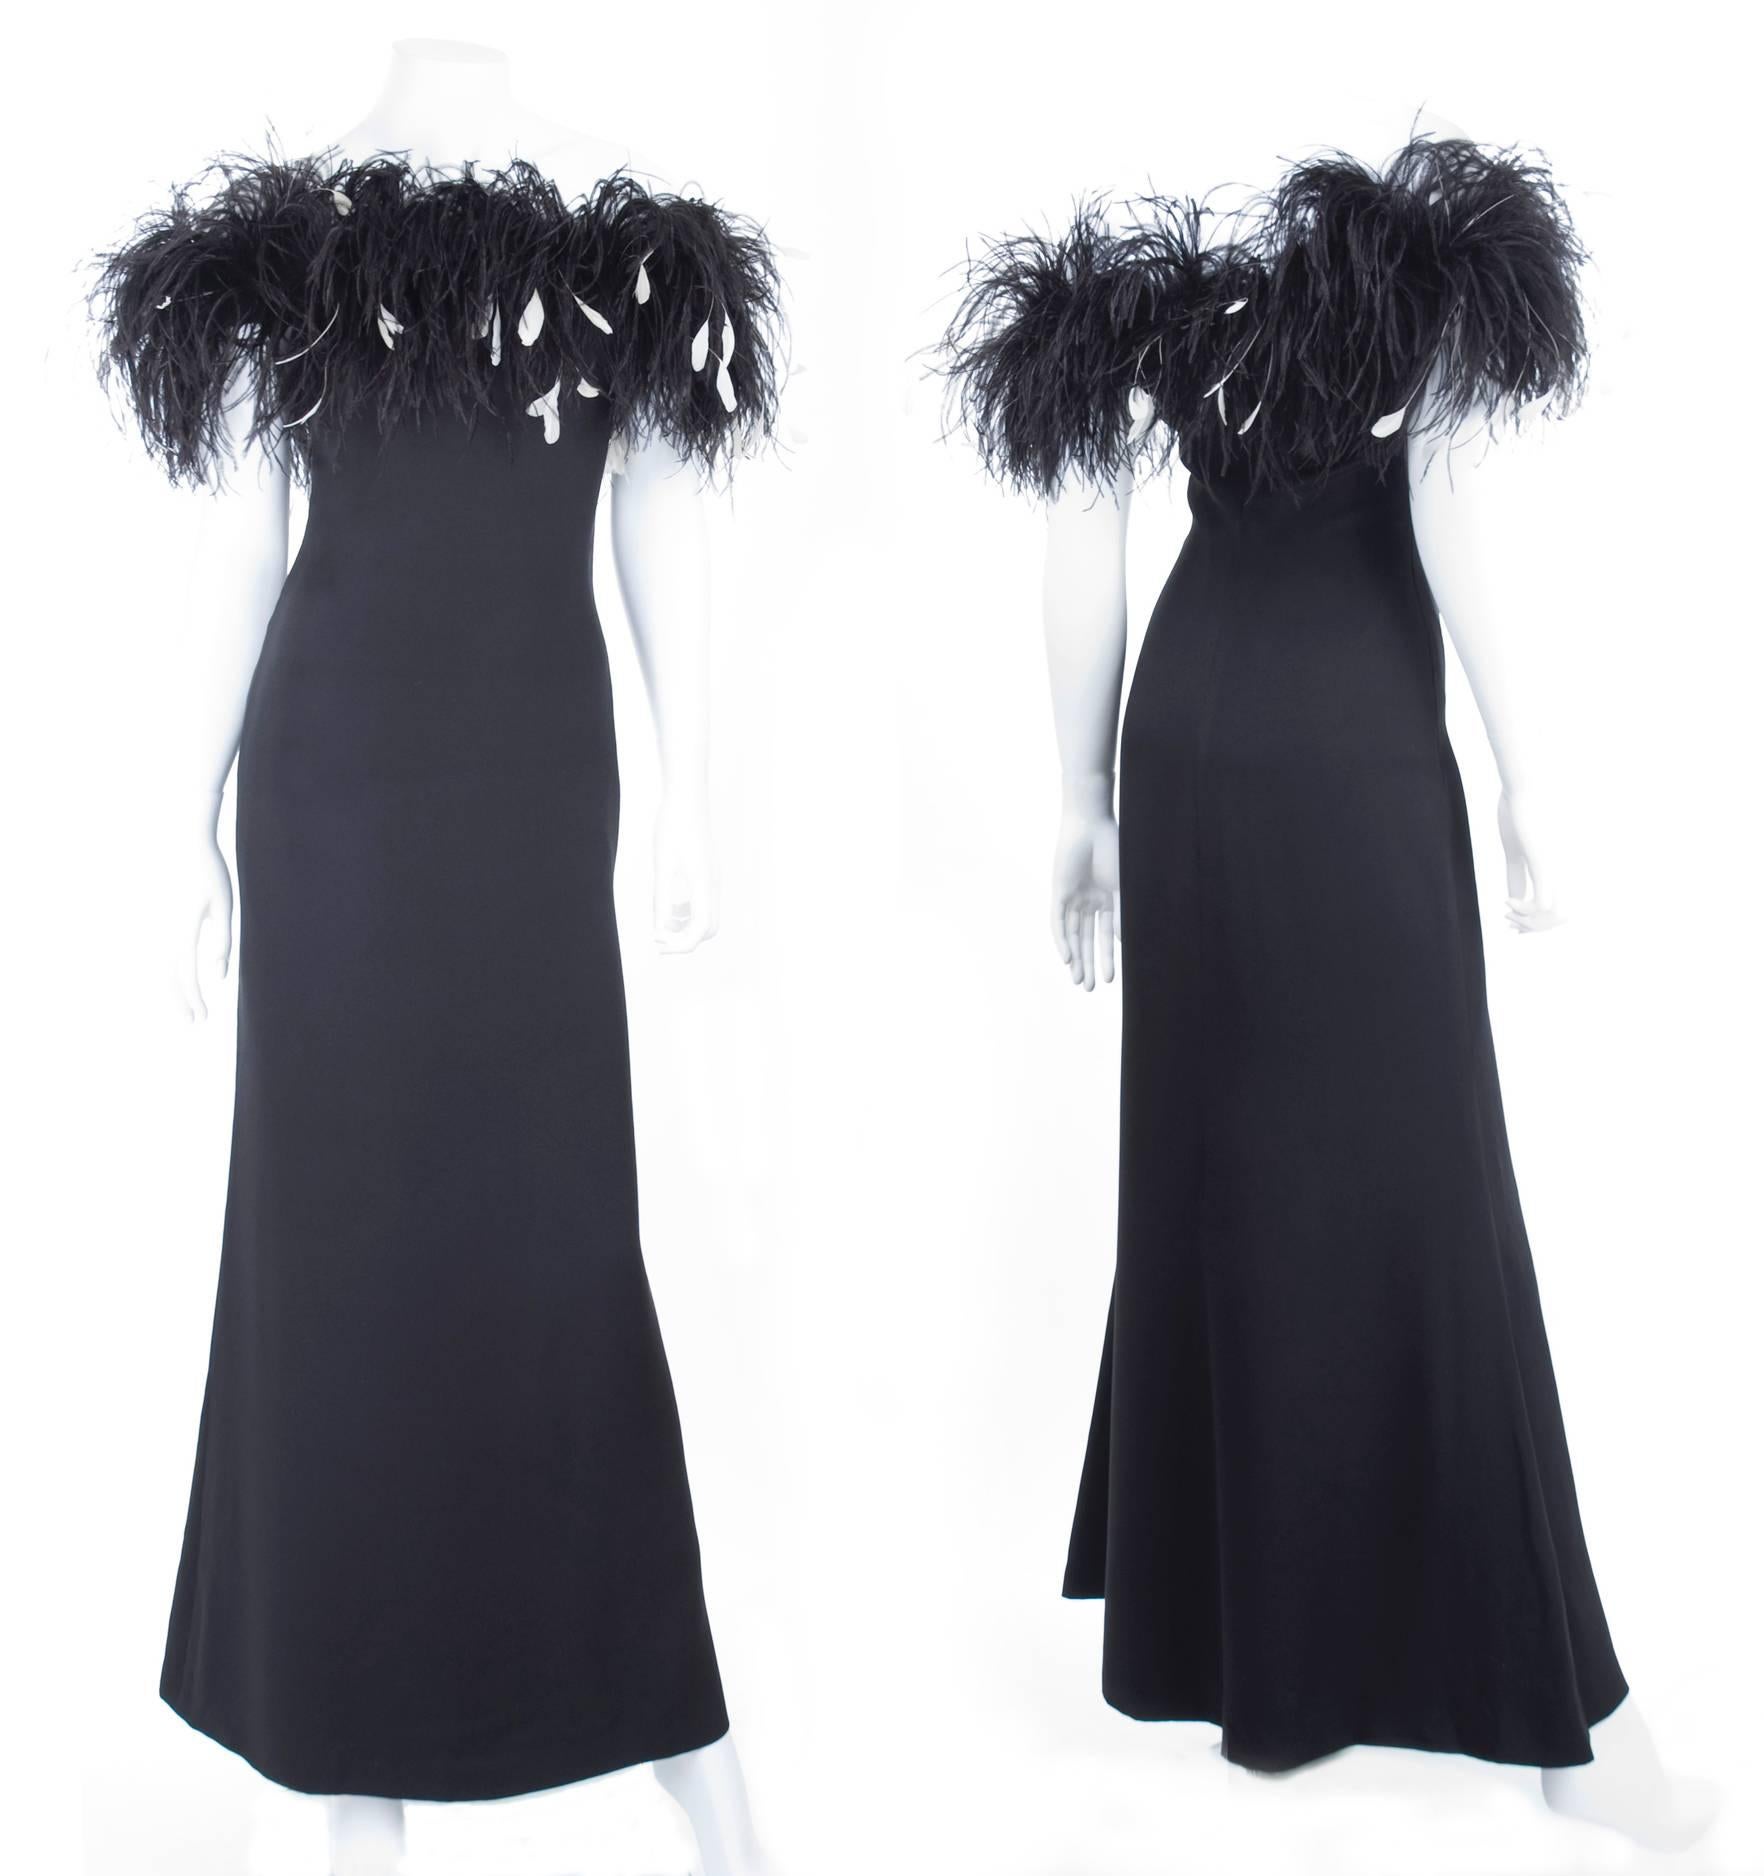 90s Yves Saint Laurent black silk gown with black and white feathers.
Side zipper. Size 38 EU
Excellent condition.
Measurement:
Length 57